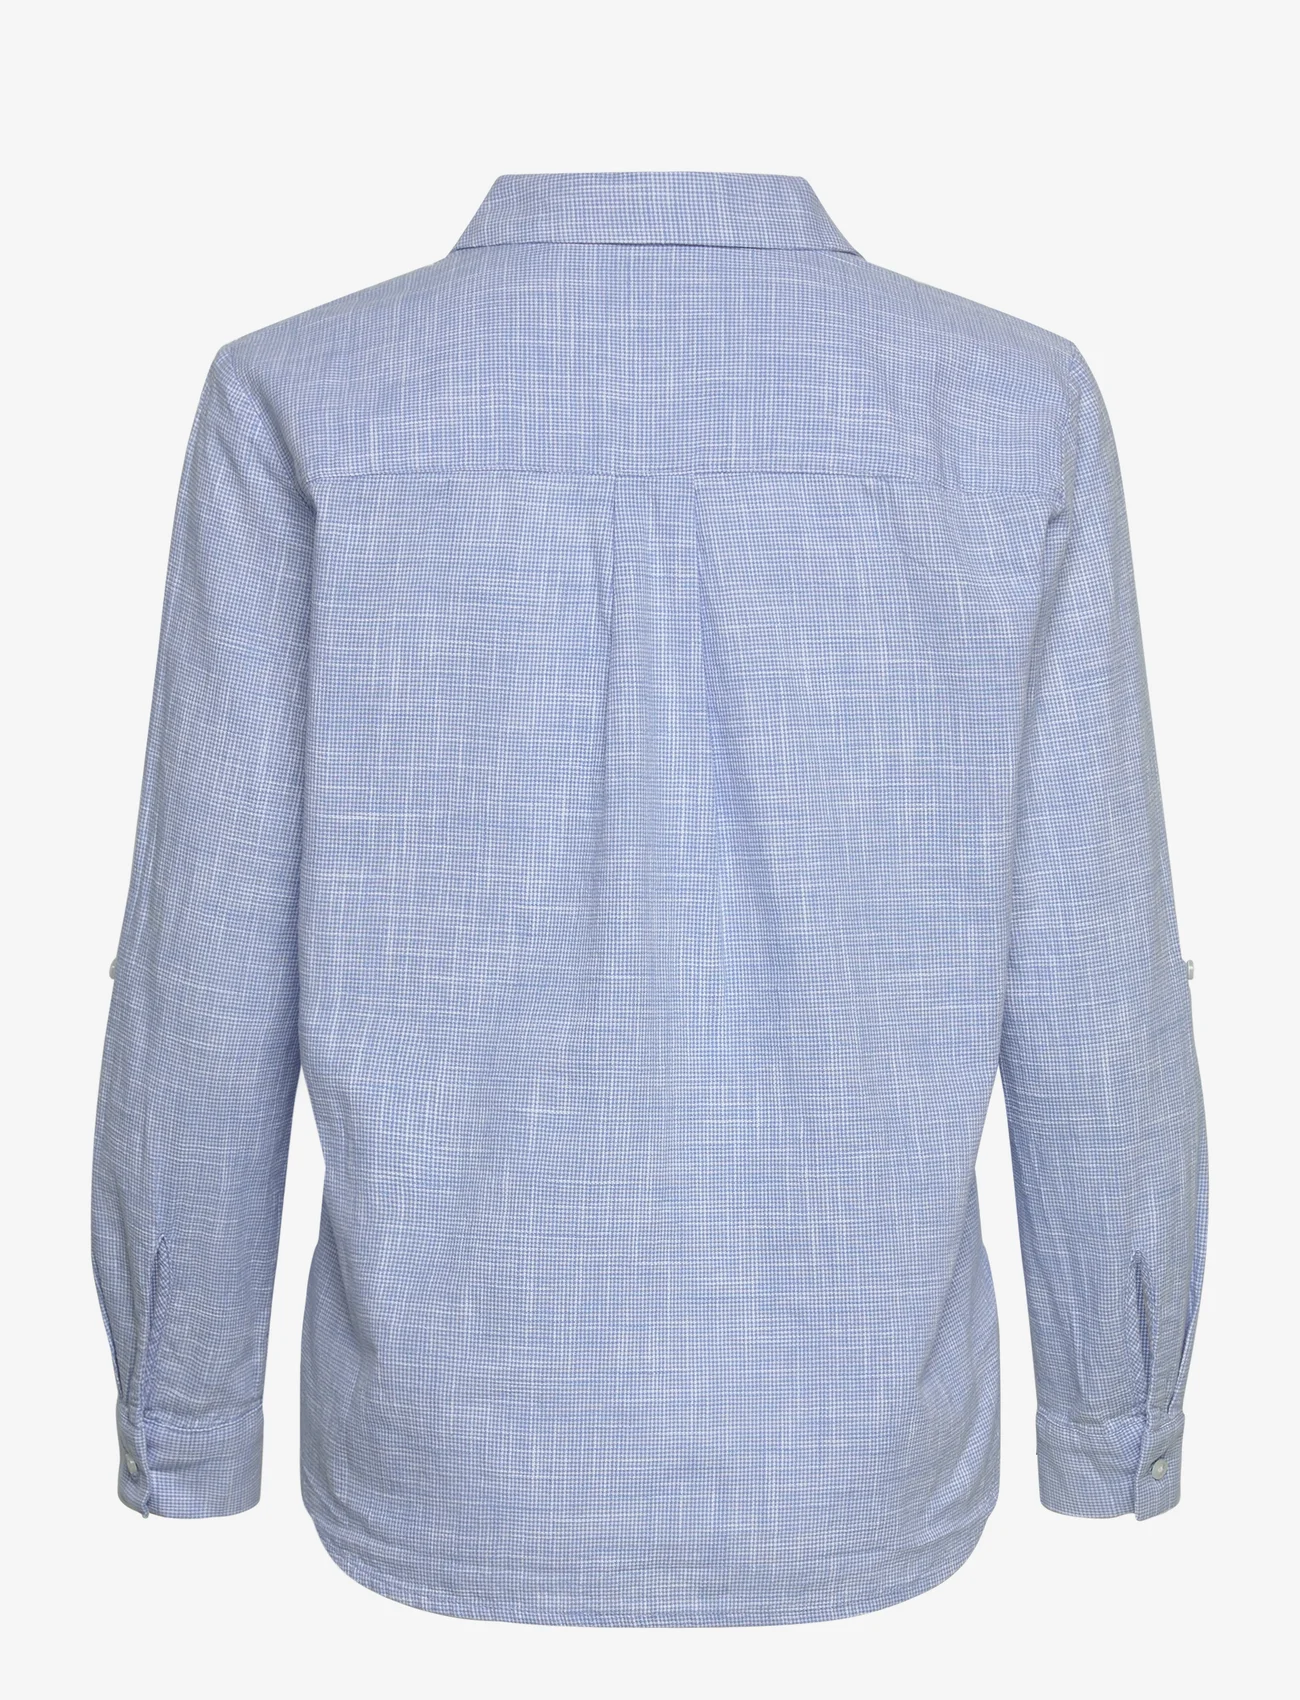 Tom Tailor - blouse with slub structure - long-sleeved shirts - dreamy blue - 1